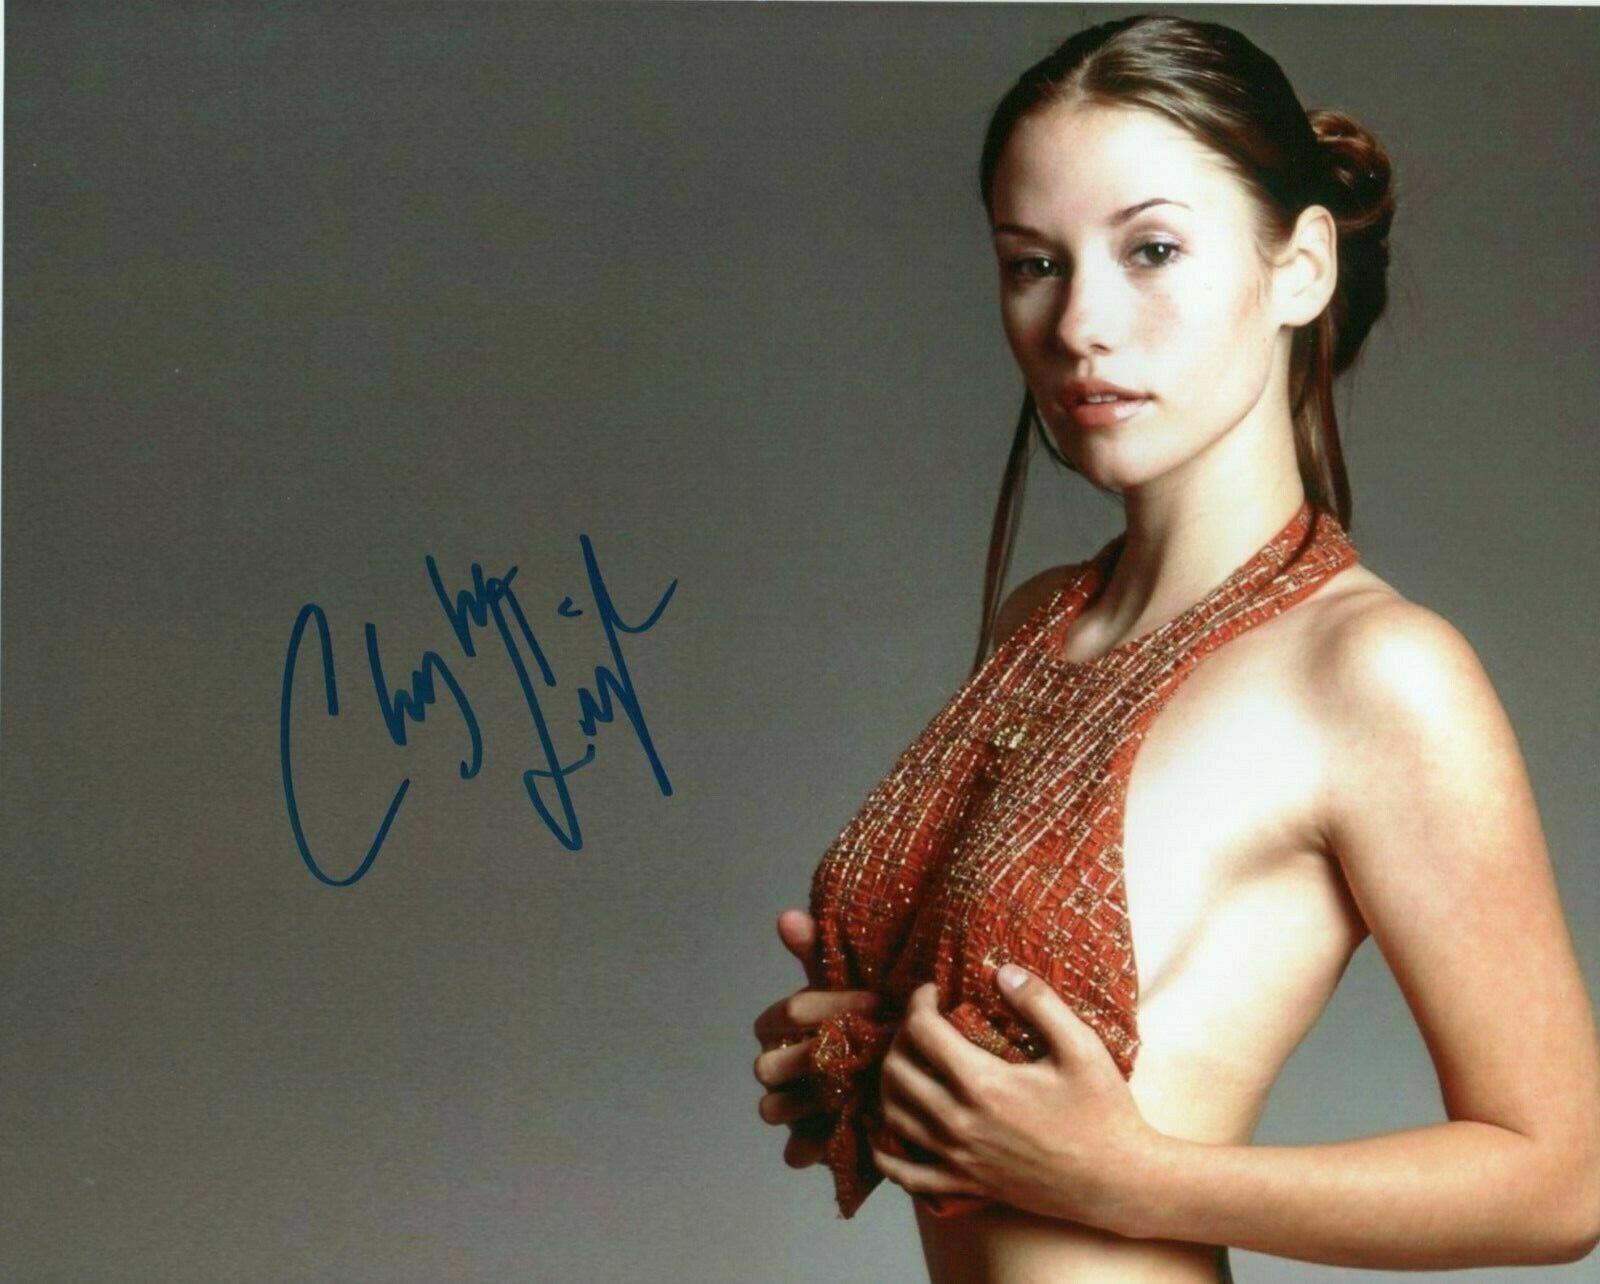 dan stackhouse recommends Chyler Leigh Sexy